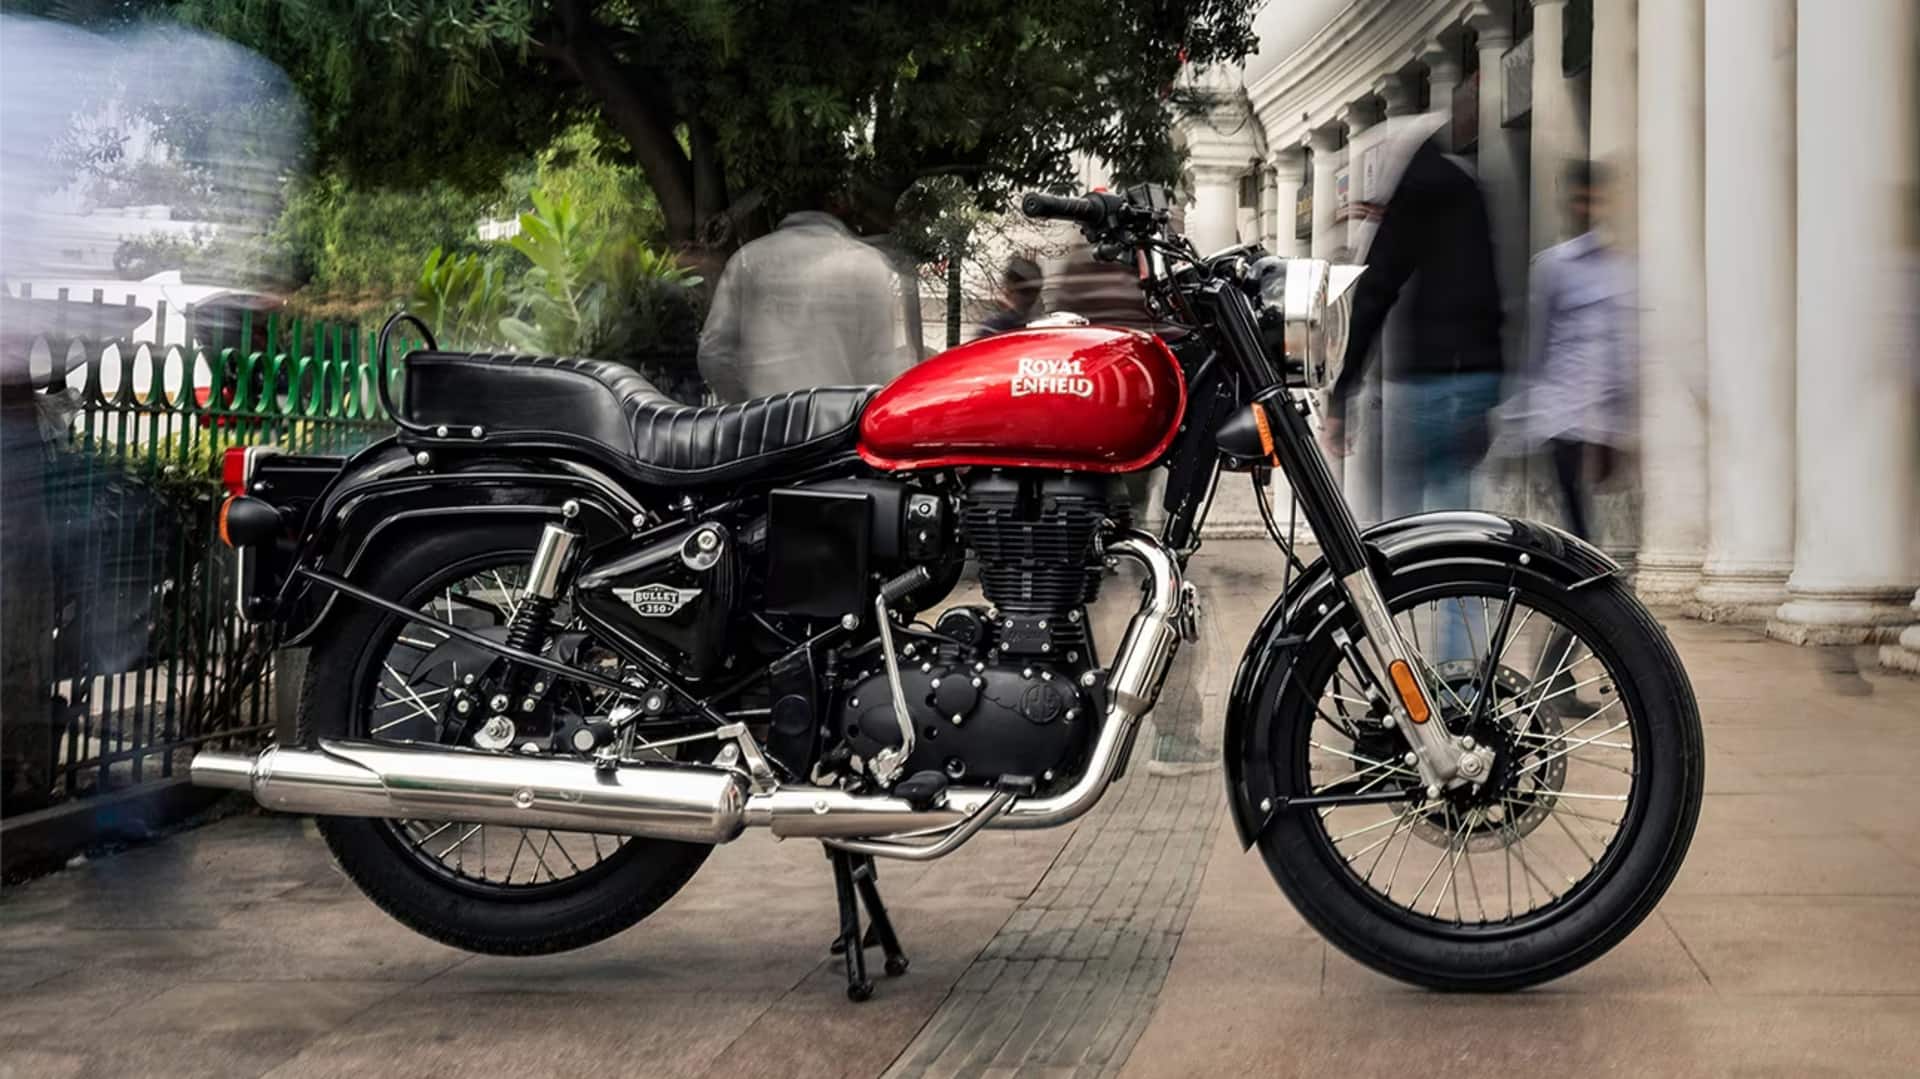 Here's why J-series platform will suit Royal Enfield Bullet 350